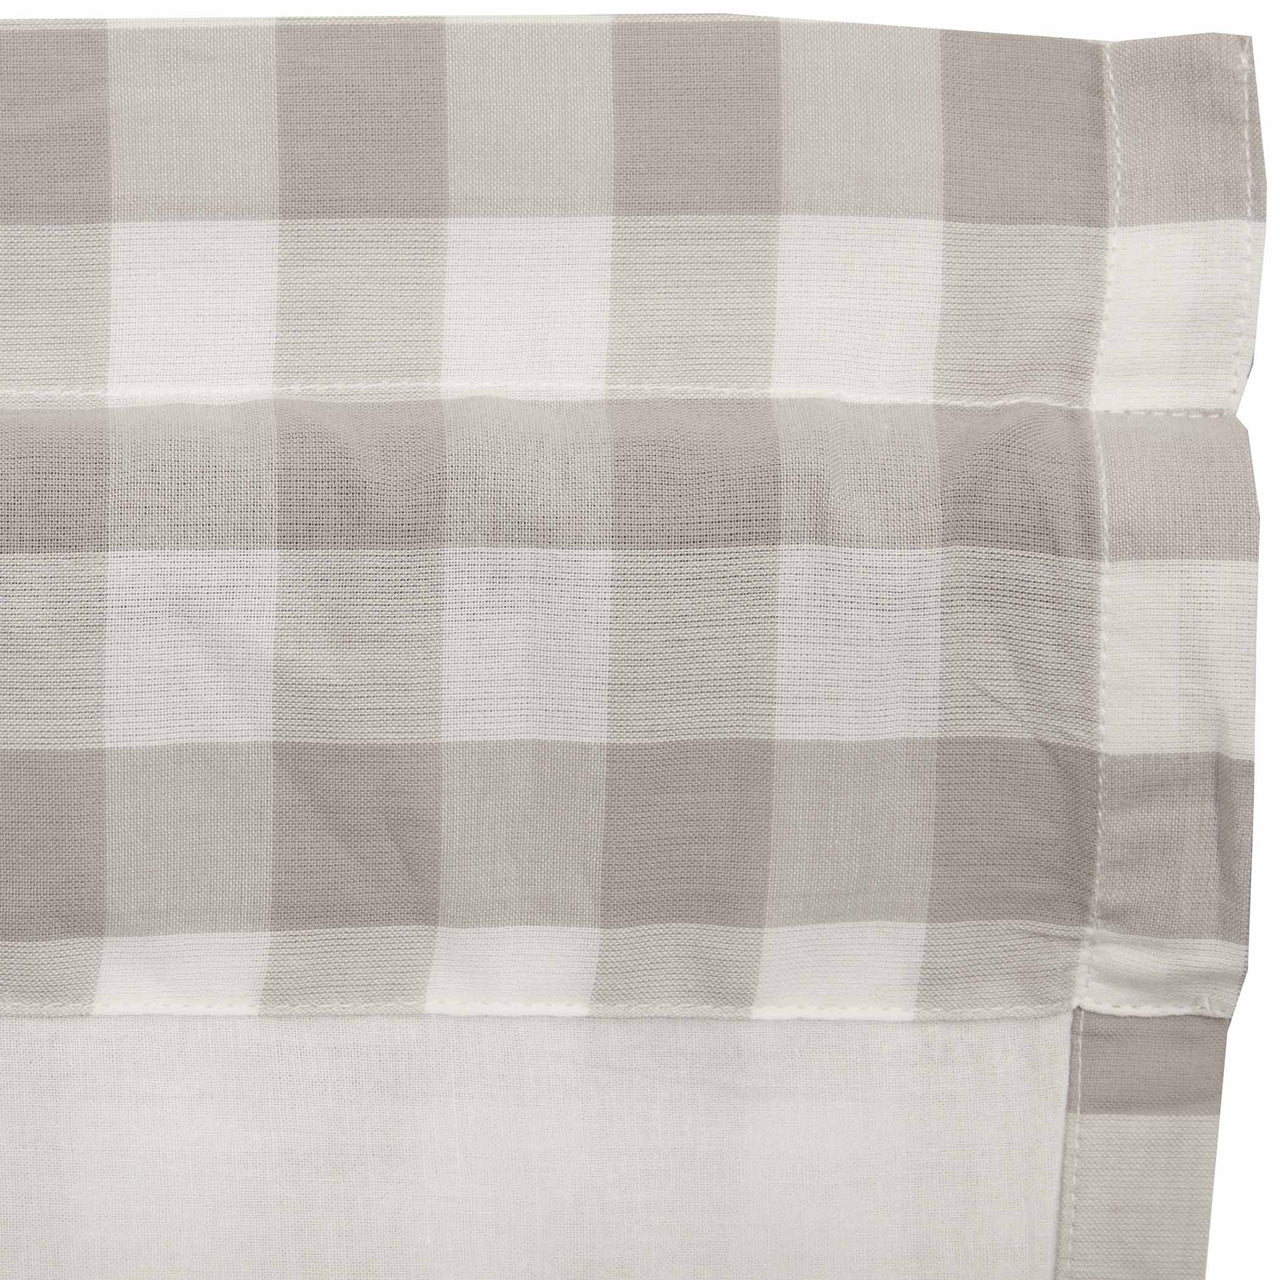 Annie Buffalo Grey Check Short Panel Curtain Set of 2 63"x36" VHC Brands